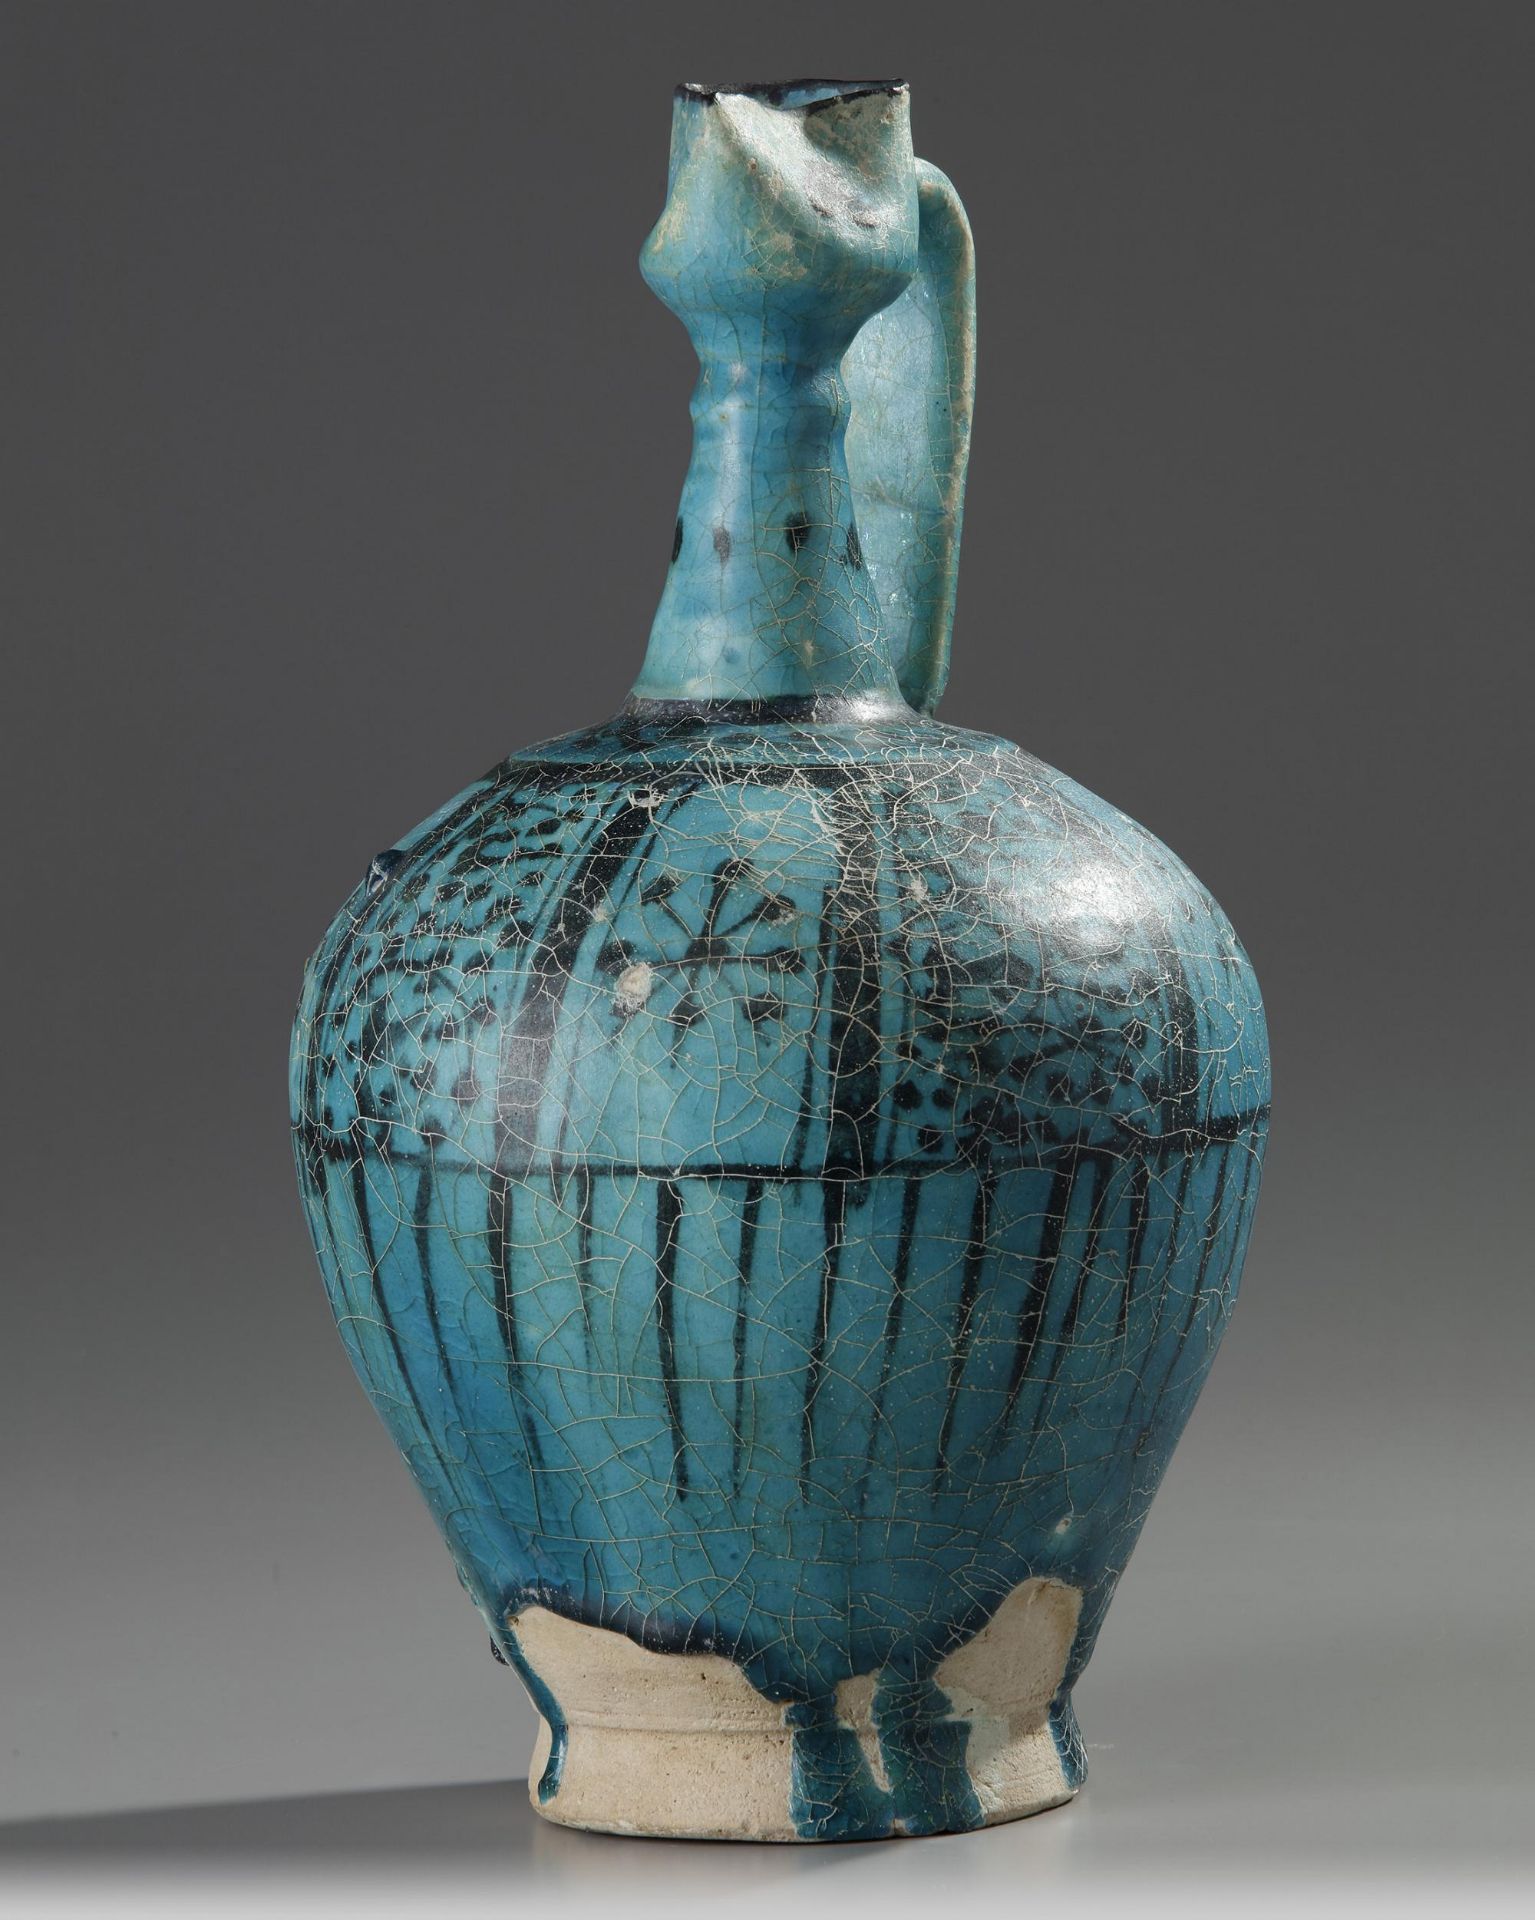 A LARGE RAQQA UNDERGLAZE PAINTED POTTERY EWER, SYRIA, 12TH-13TH CENTURY - Image 3 of 5